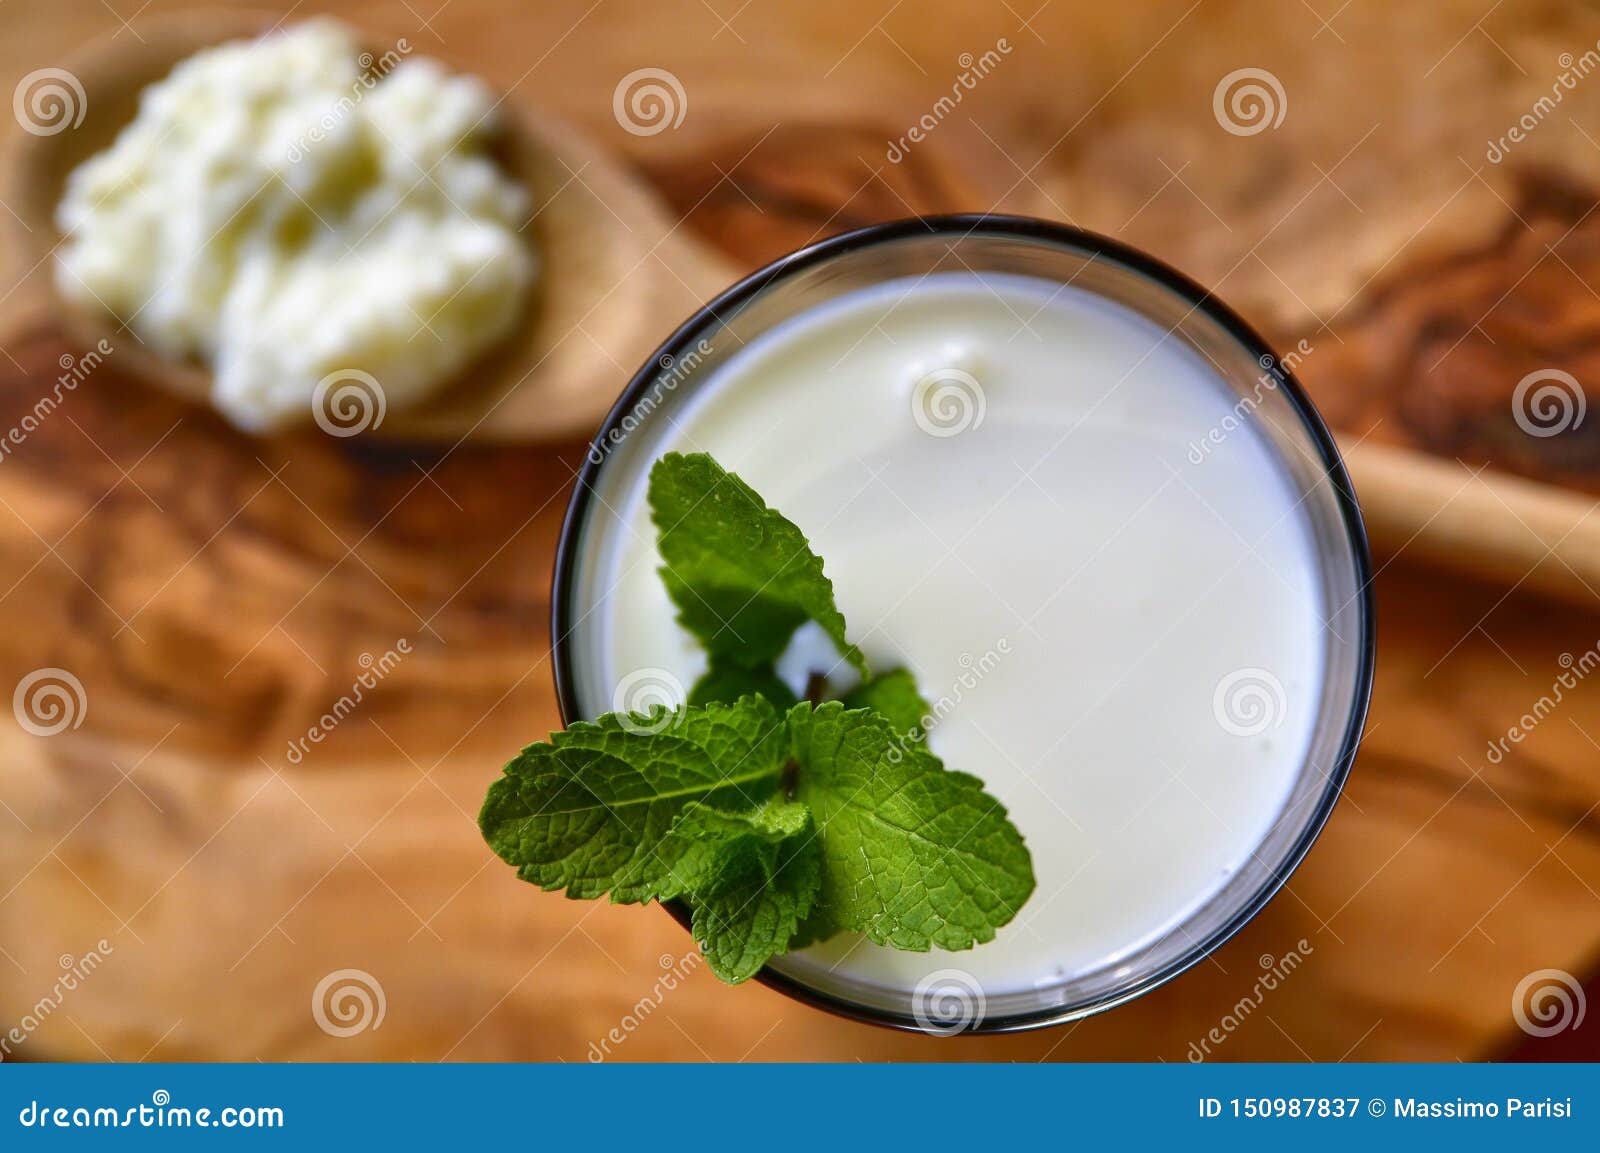 close-up shot on a full glass of white kefir